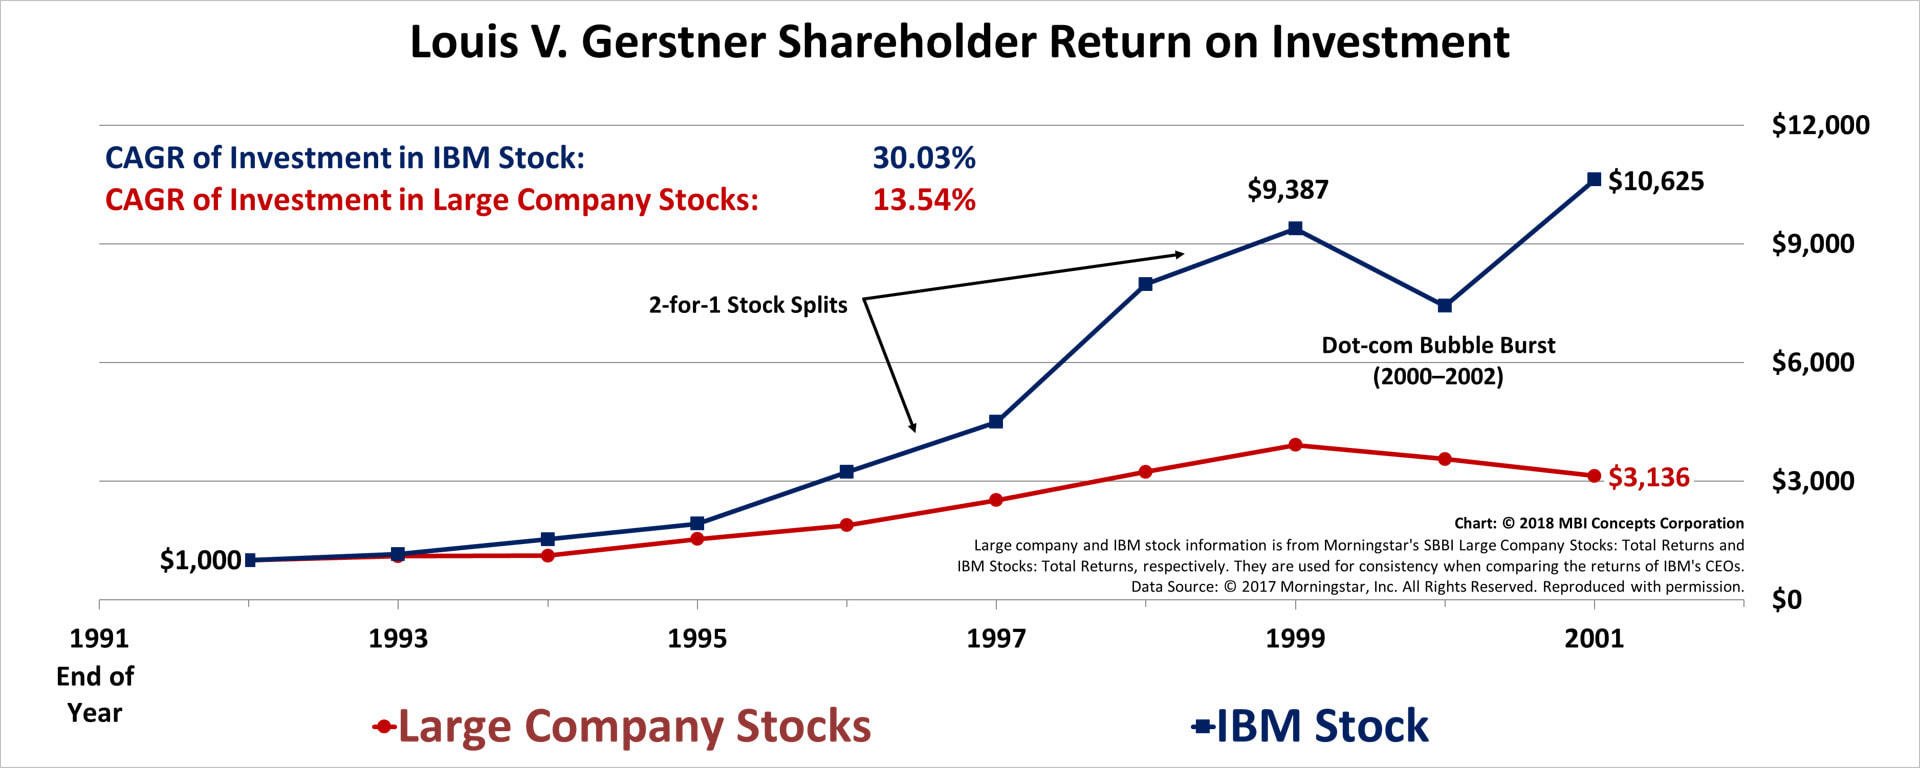 A color line graph showing IBM Stock Total Return on Investment for Louis V. (Lou) Gerstner from 1993 to 2001 compared with a large company stock index.